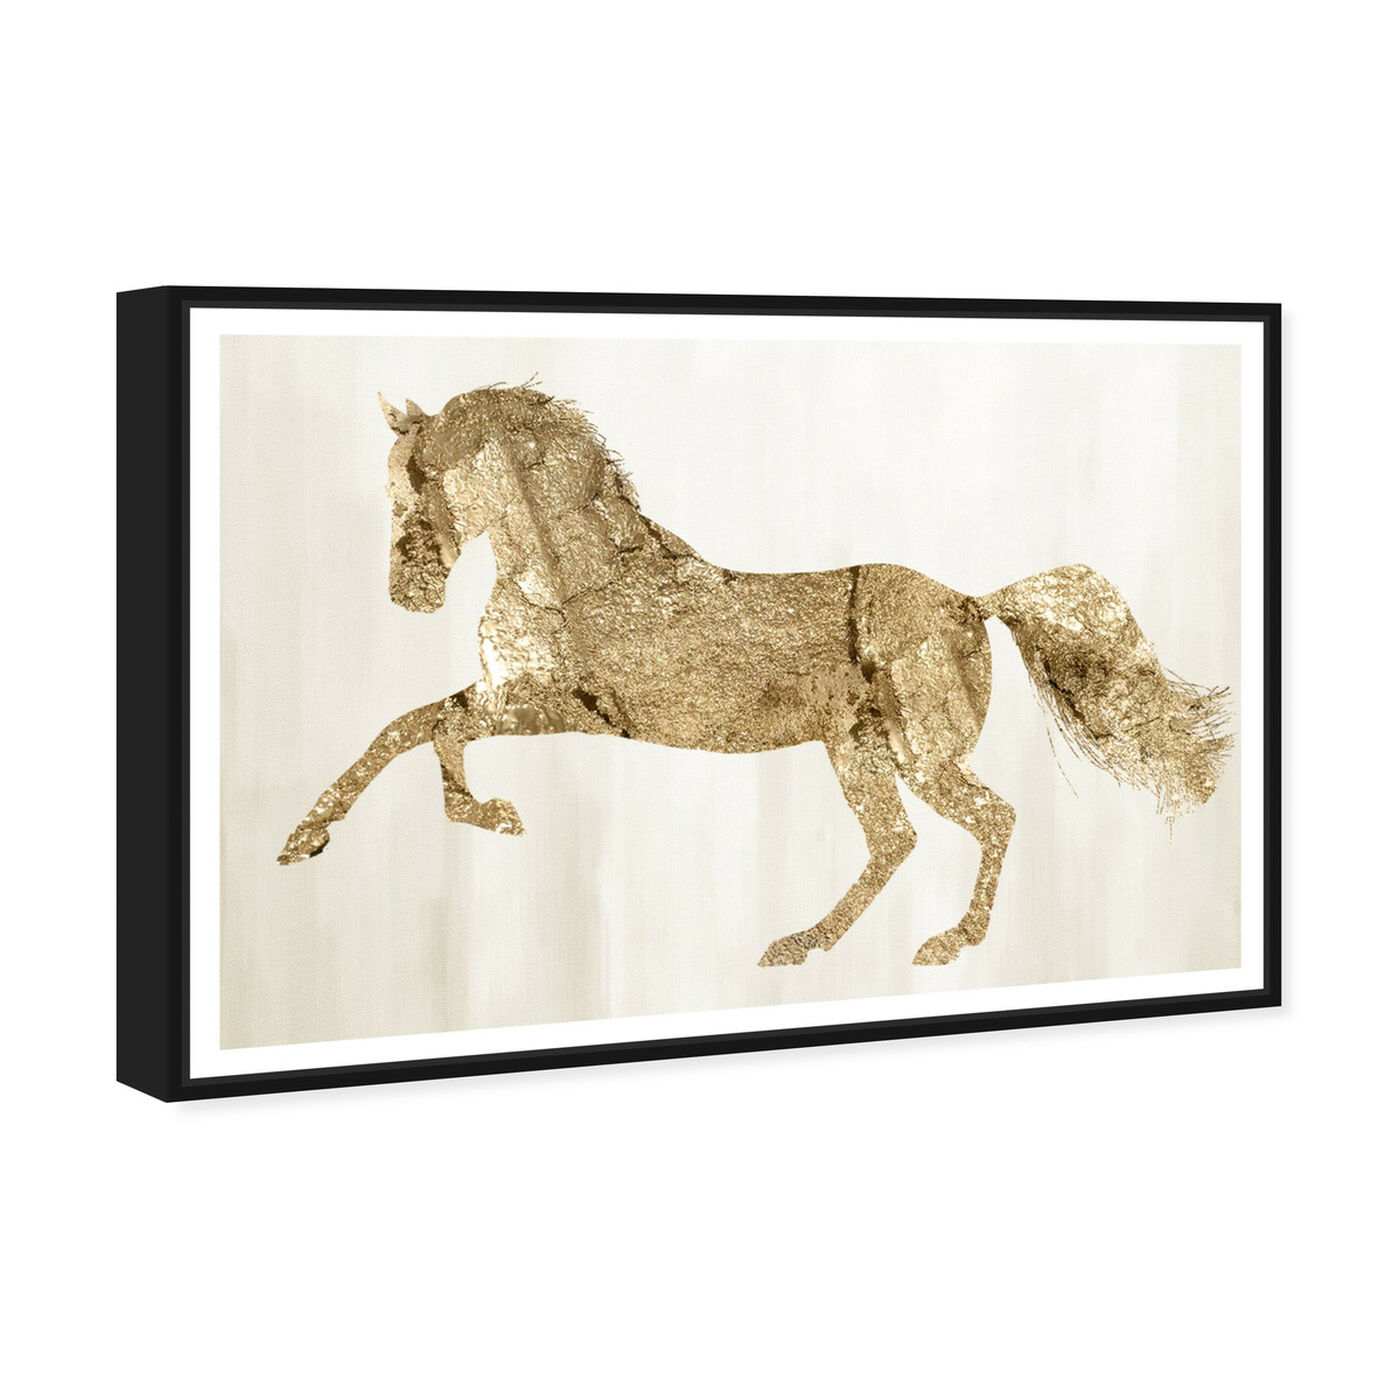 Angled view of Gold Wild and Free featuring animals and farm animals art.